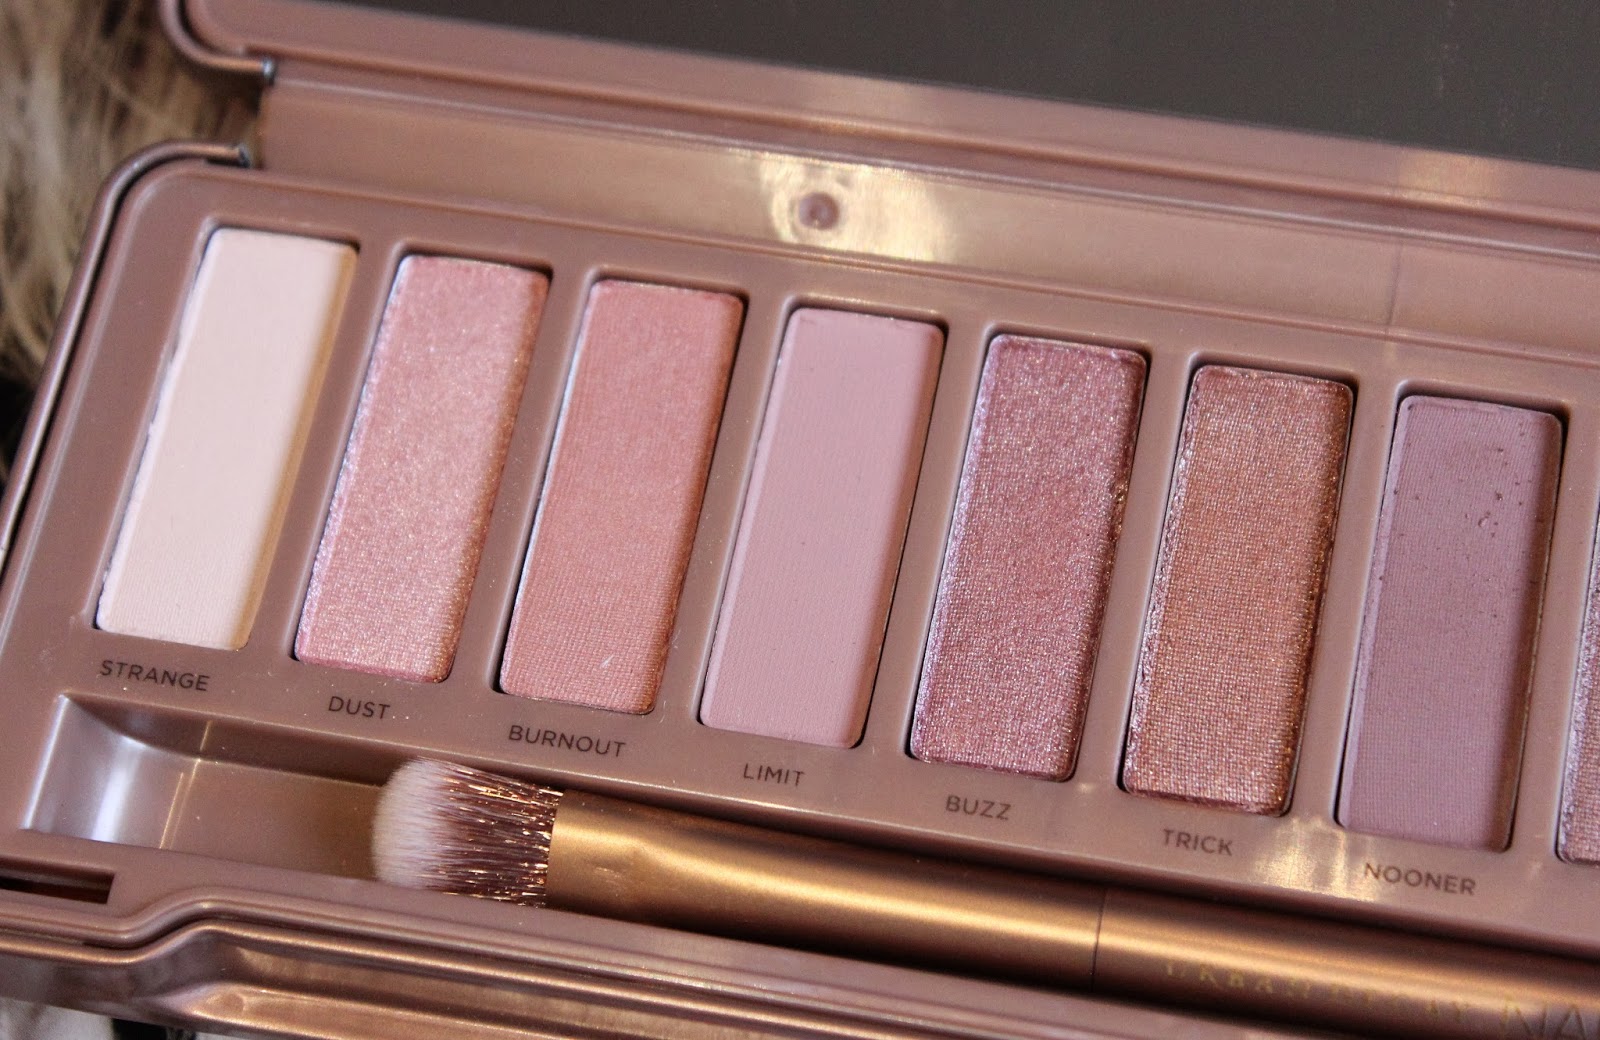 Urban Decay Naked Palette | Its Back! Urban Decay 